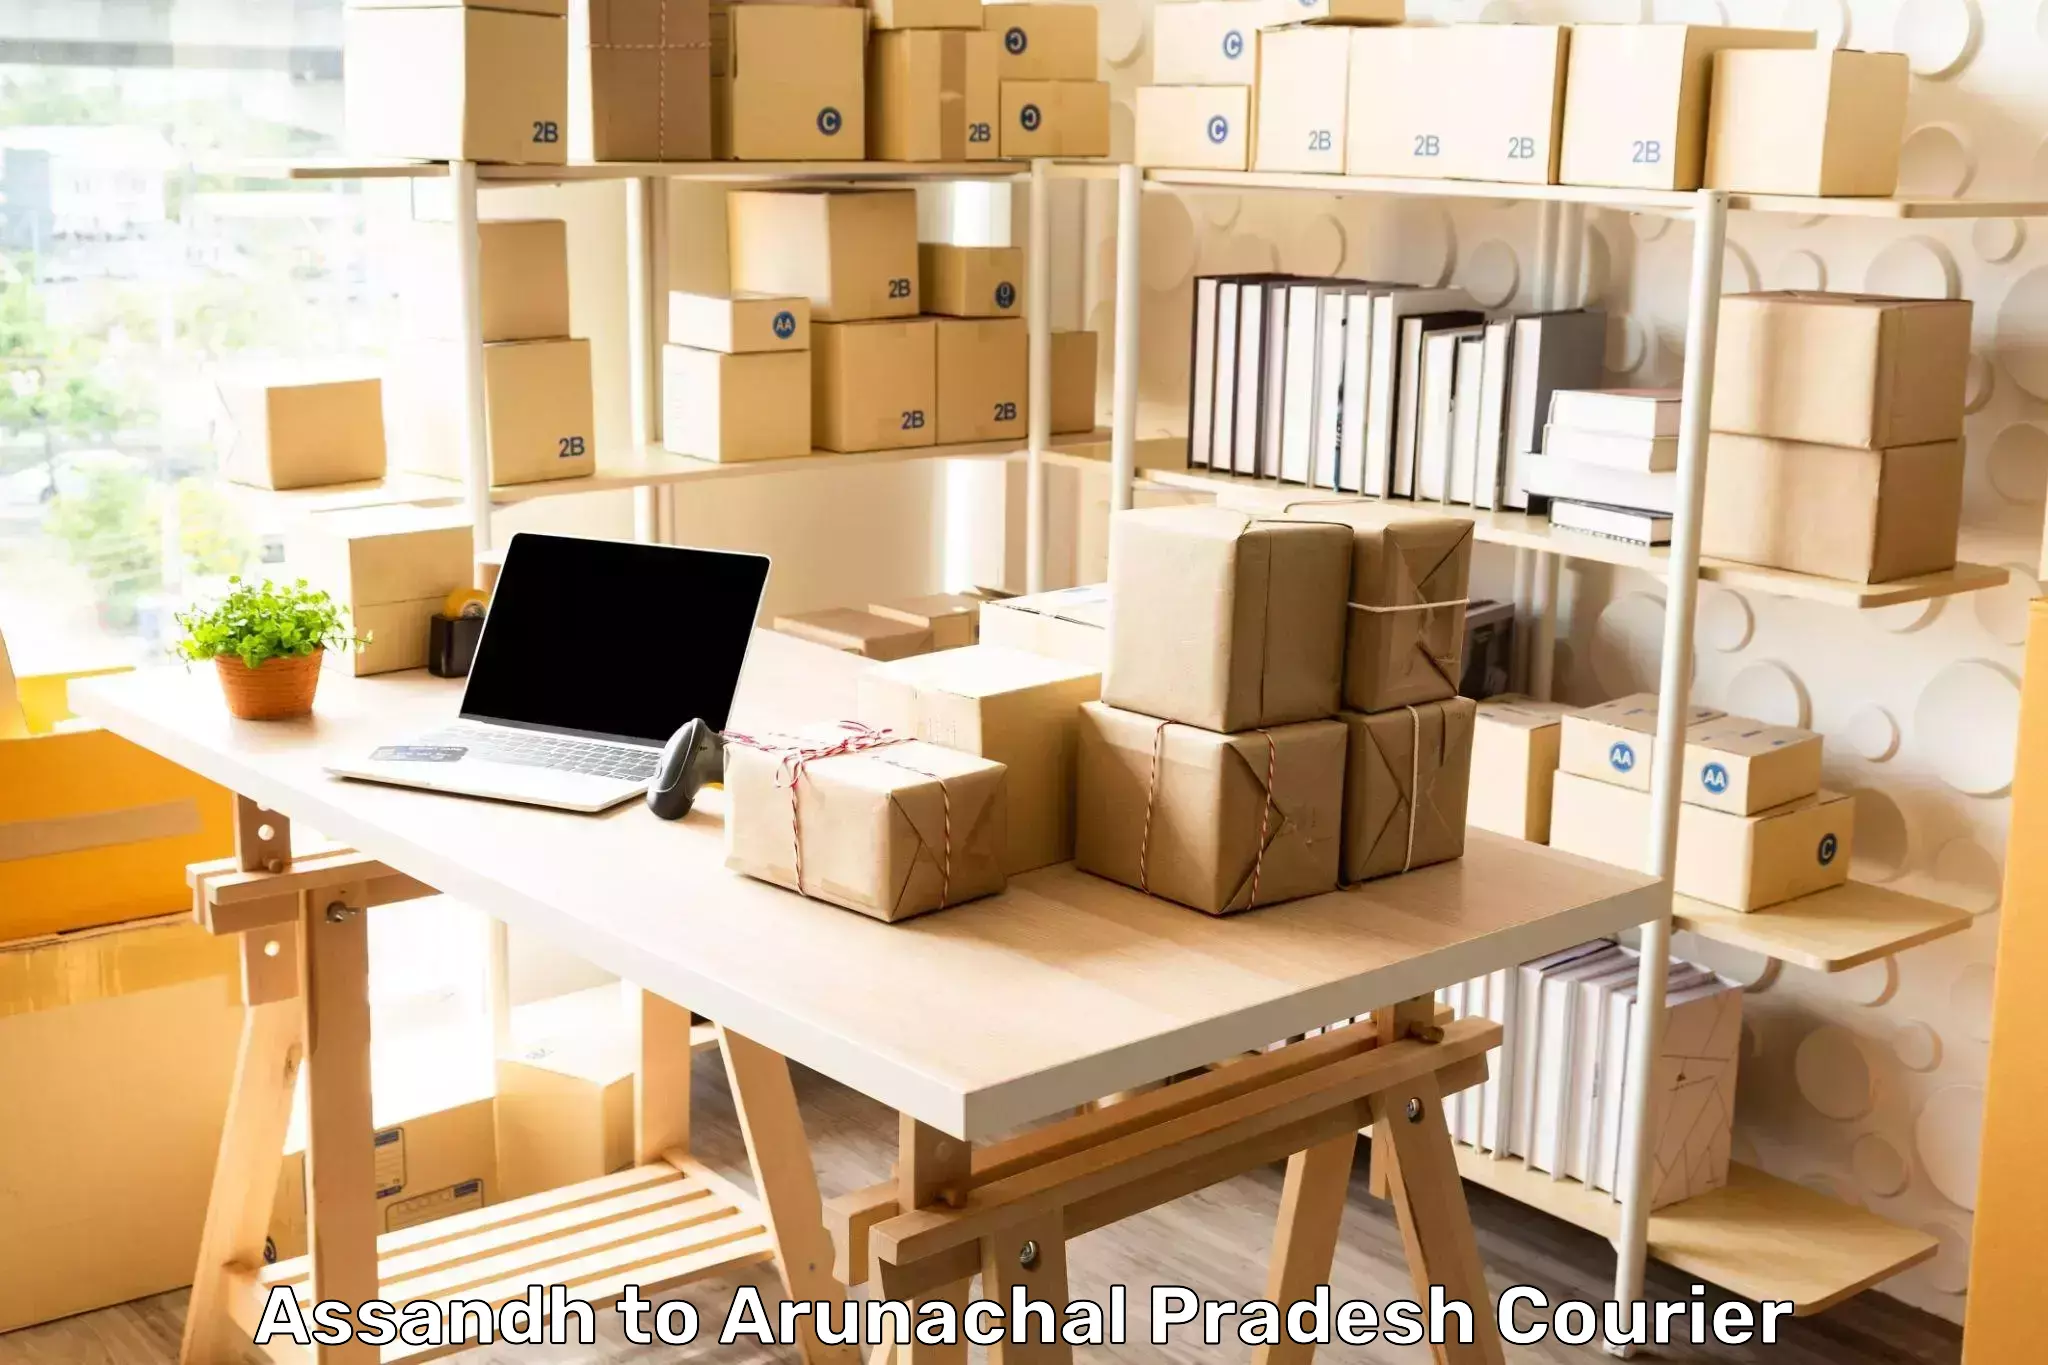 Logistics and distribution Assandh to Lohit